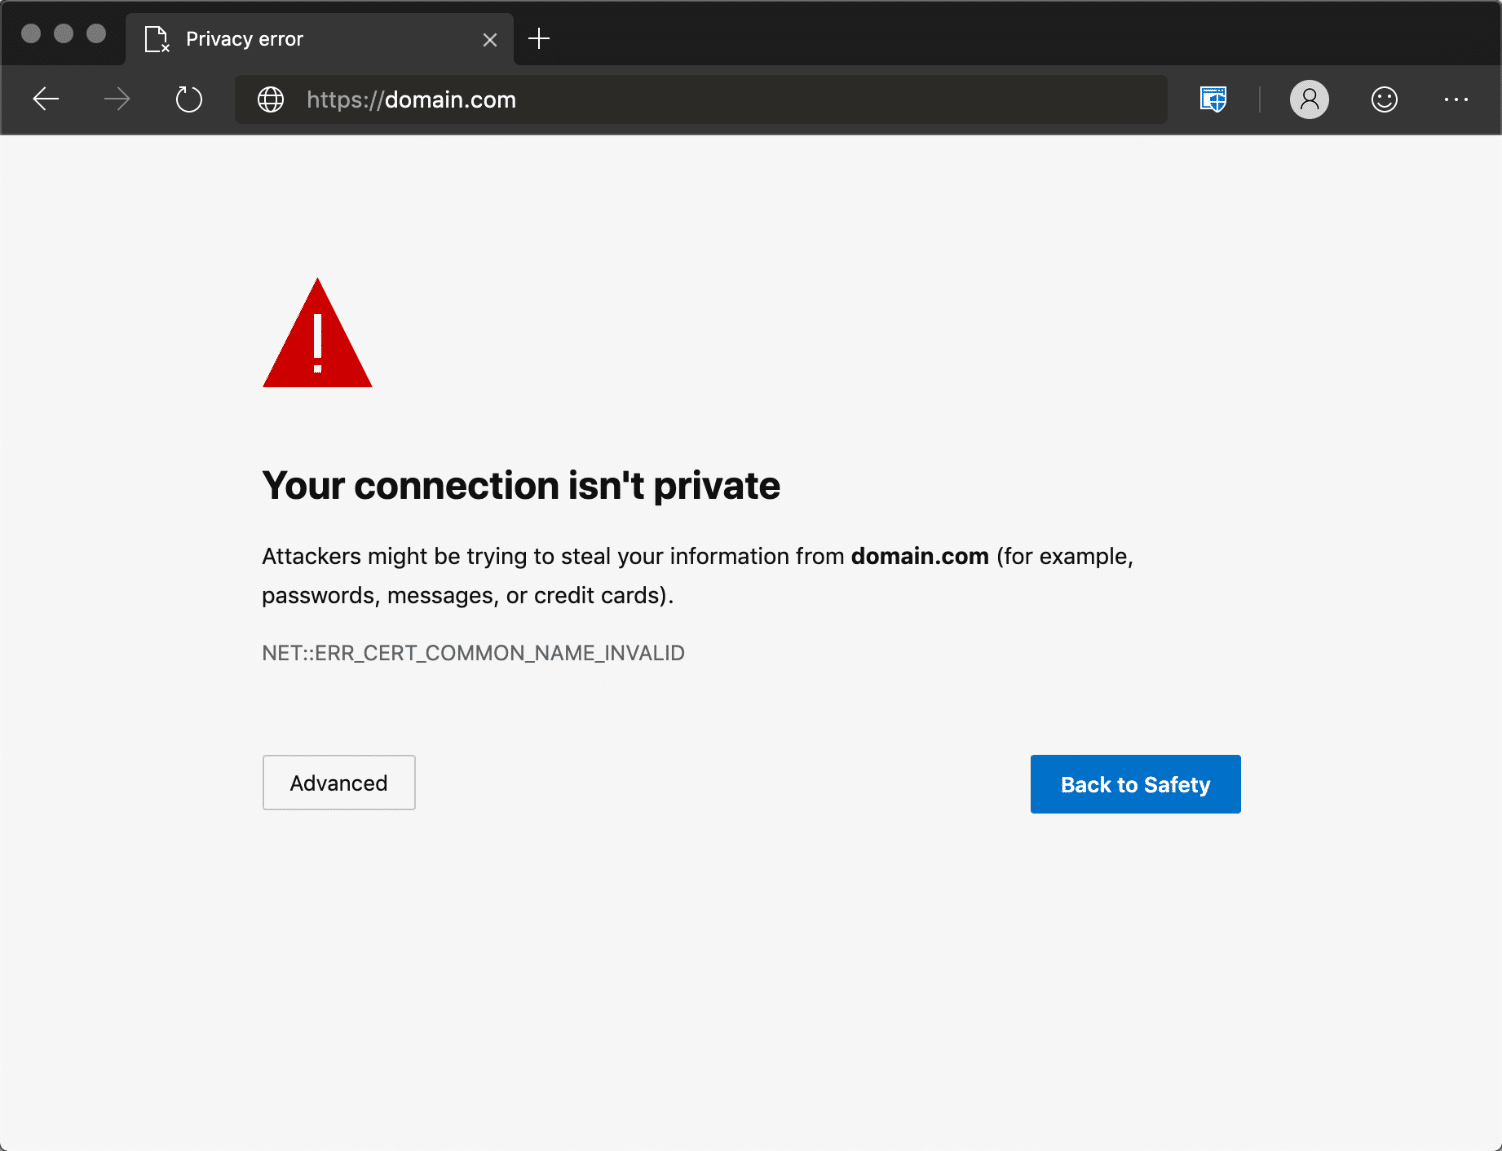 Your connection is not private error in Edge